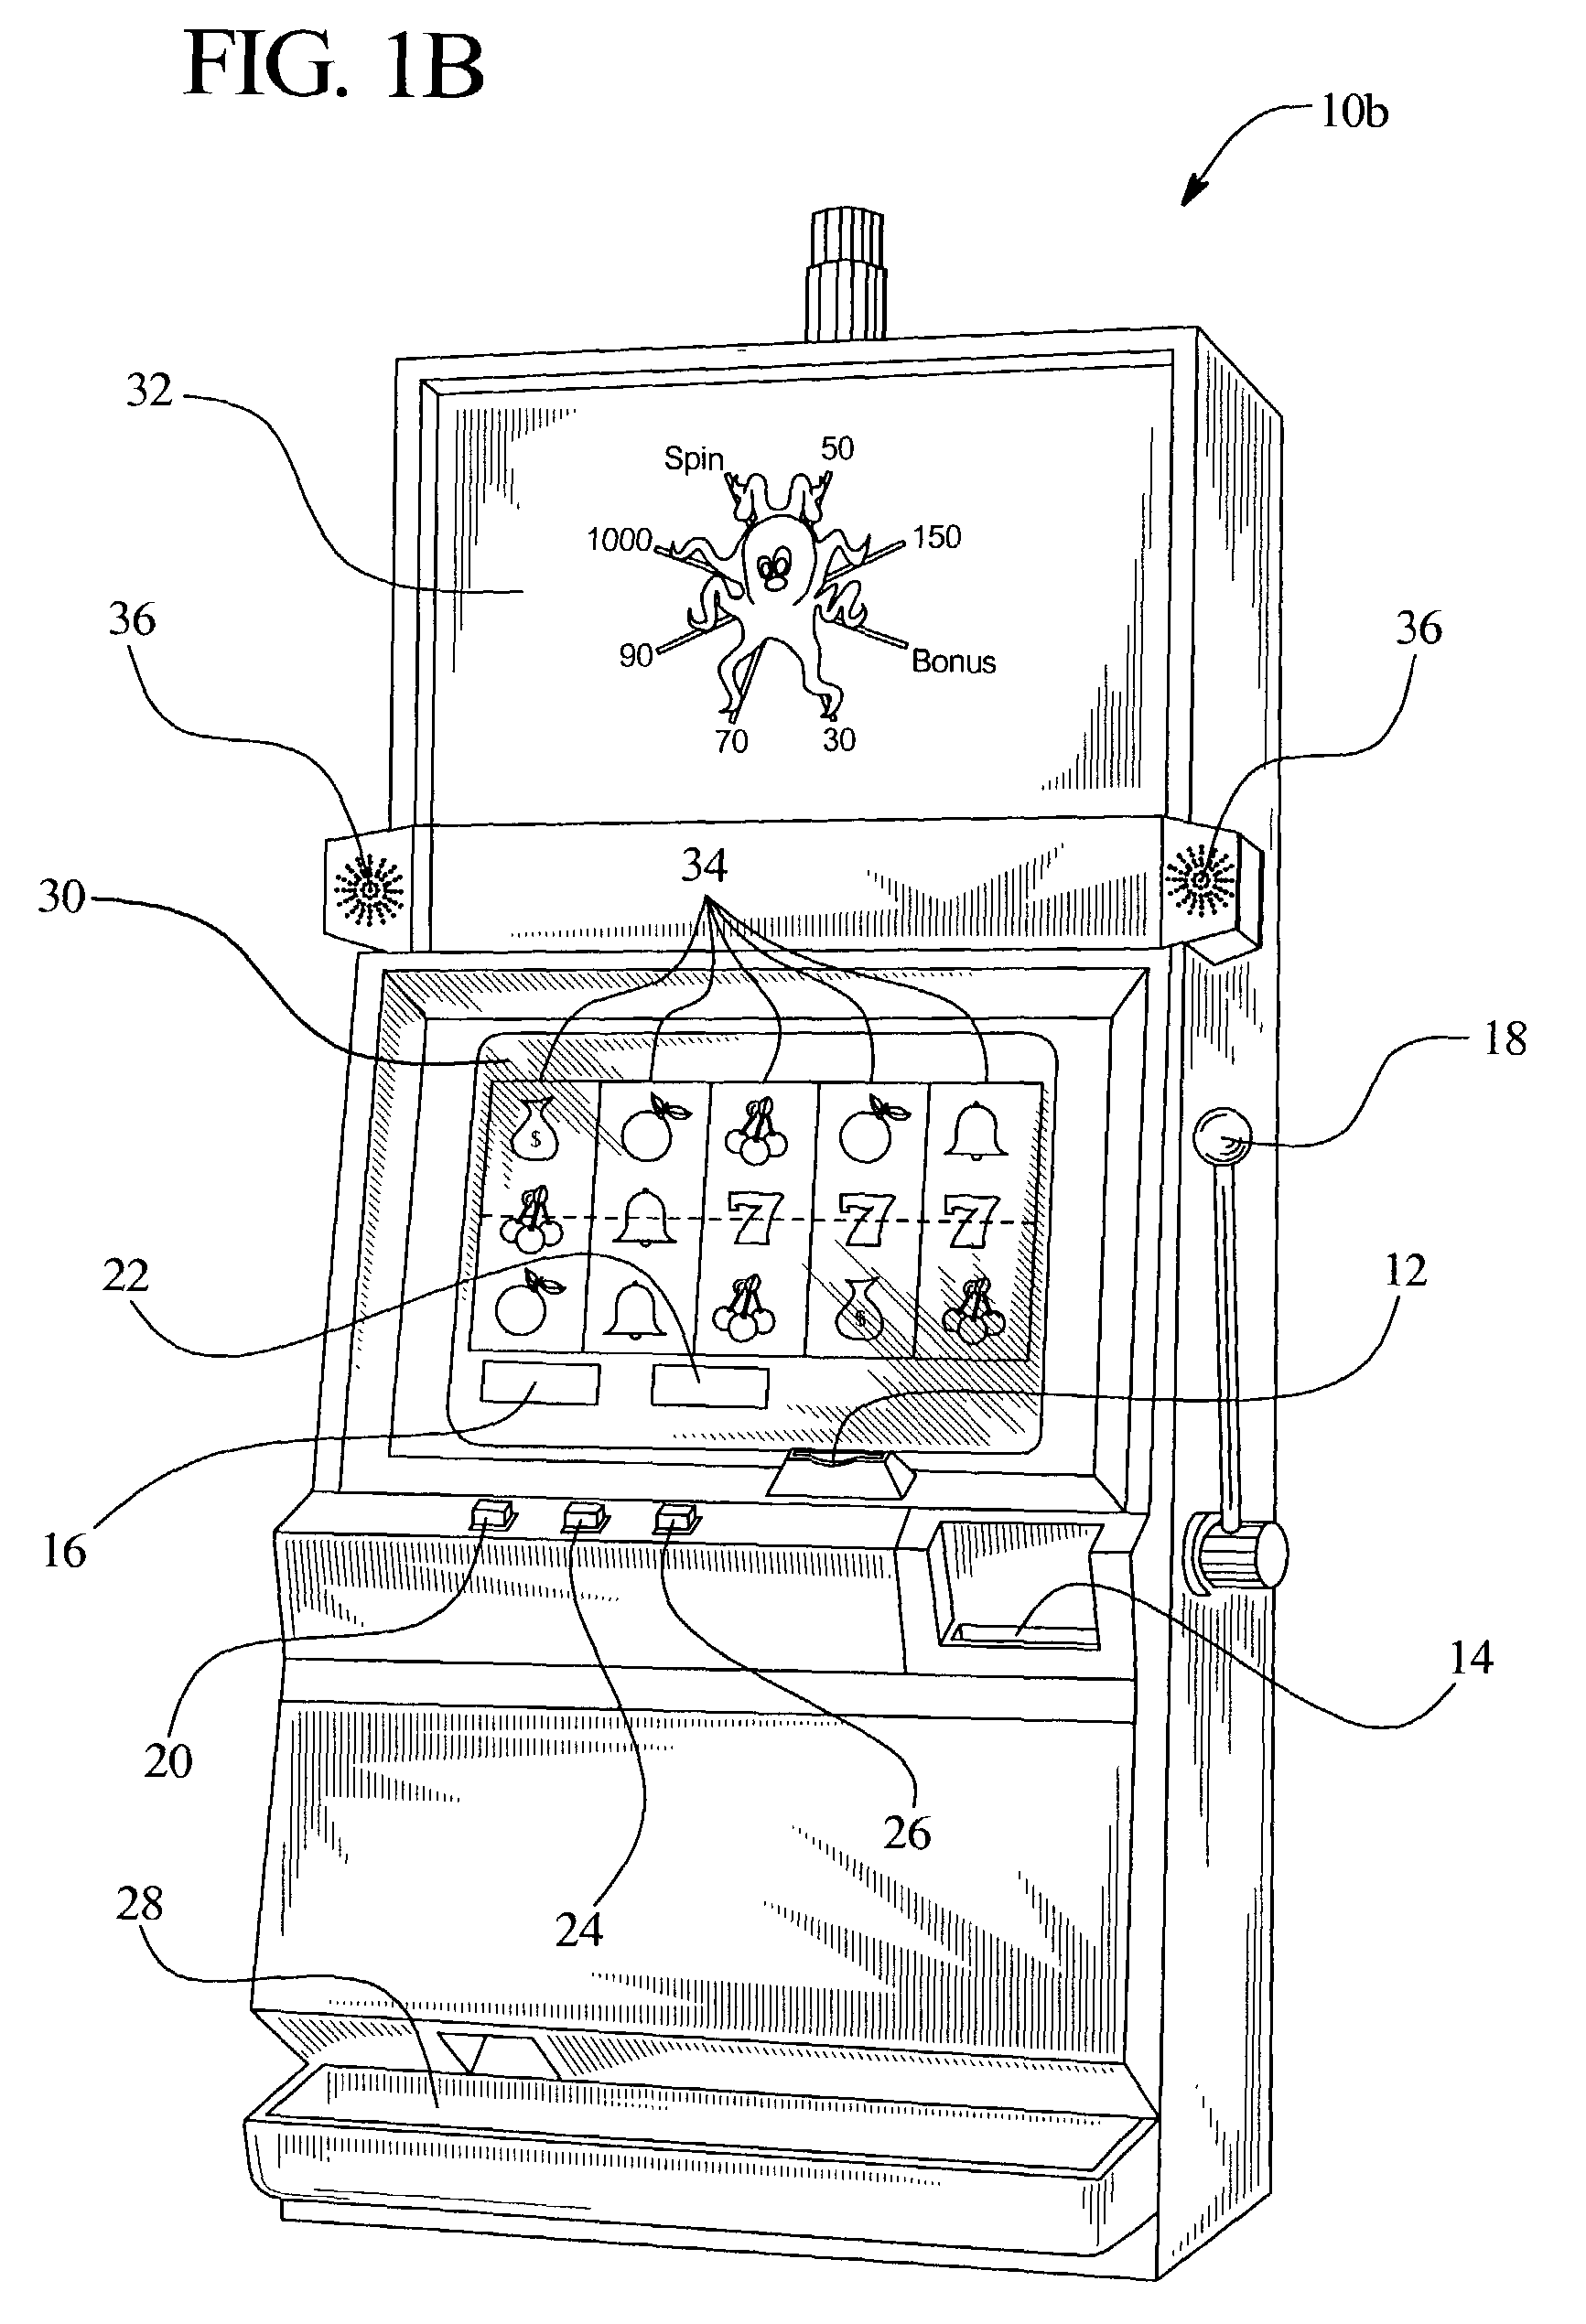 Gaming device having display with multiple radially translating indicators